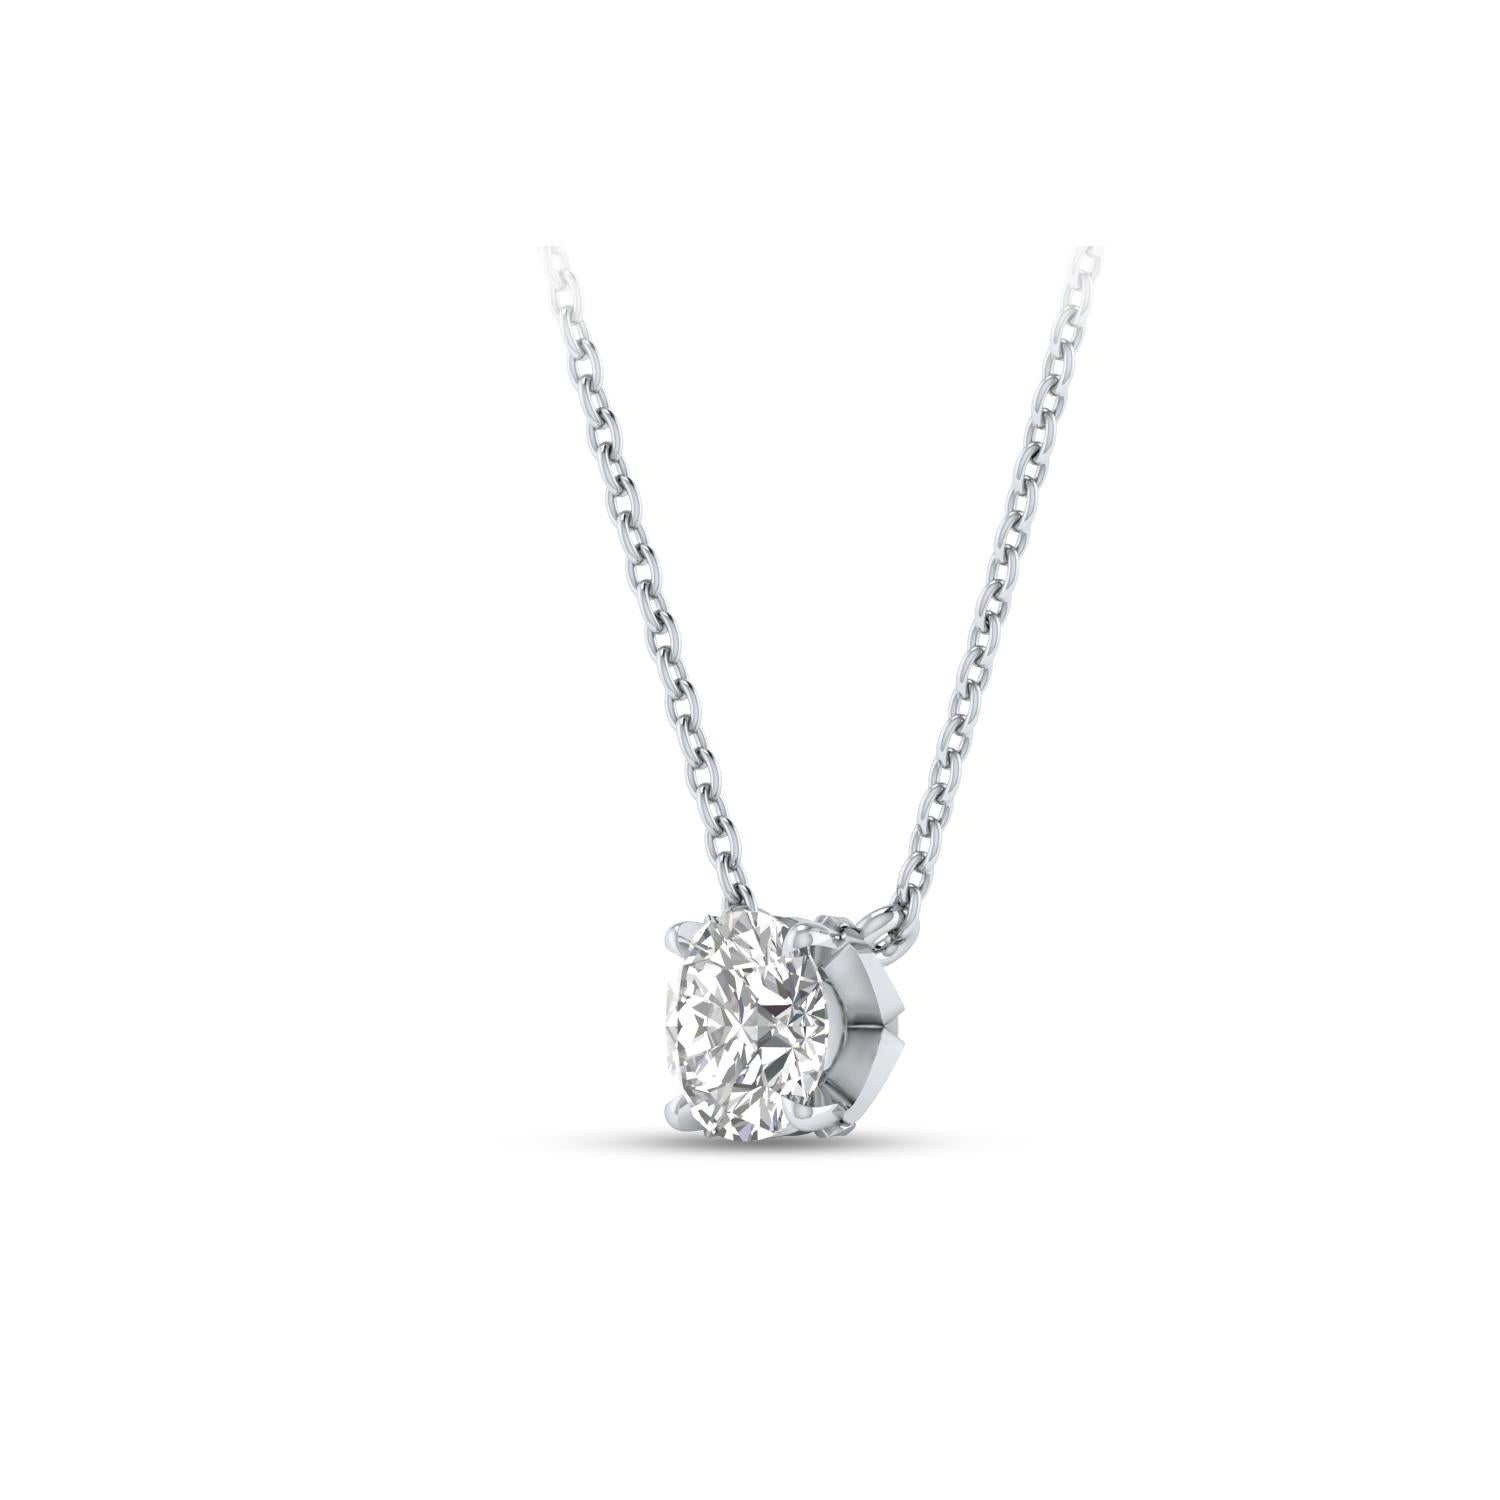  This solitaire diamond necklace features a single, brilliant-cut 0.28 carat diamond in prong setting crafted in 18 KT white gold. This elegant necklace includes 20-inch cable chain with extender at 18-inch. 

(Carat weights may vary slightly due to